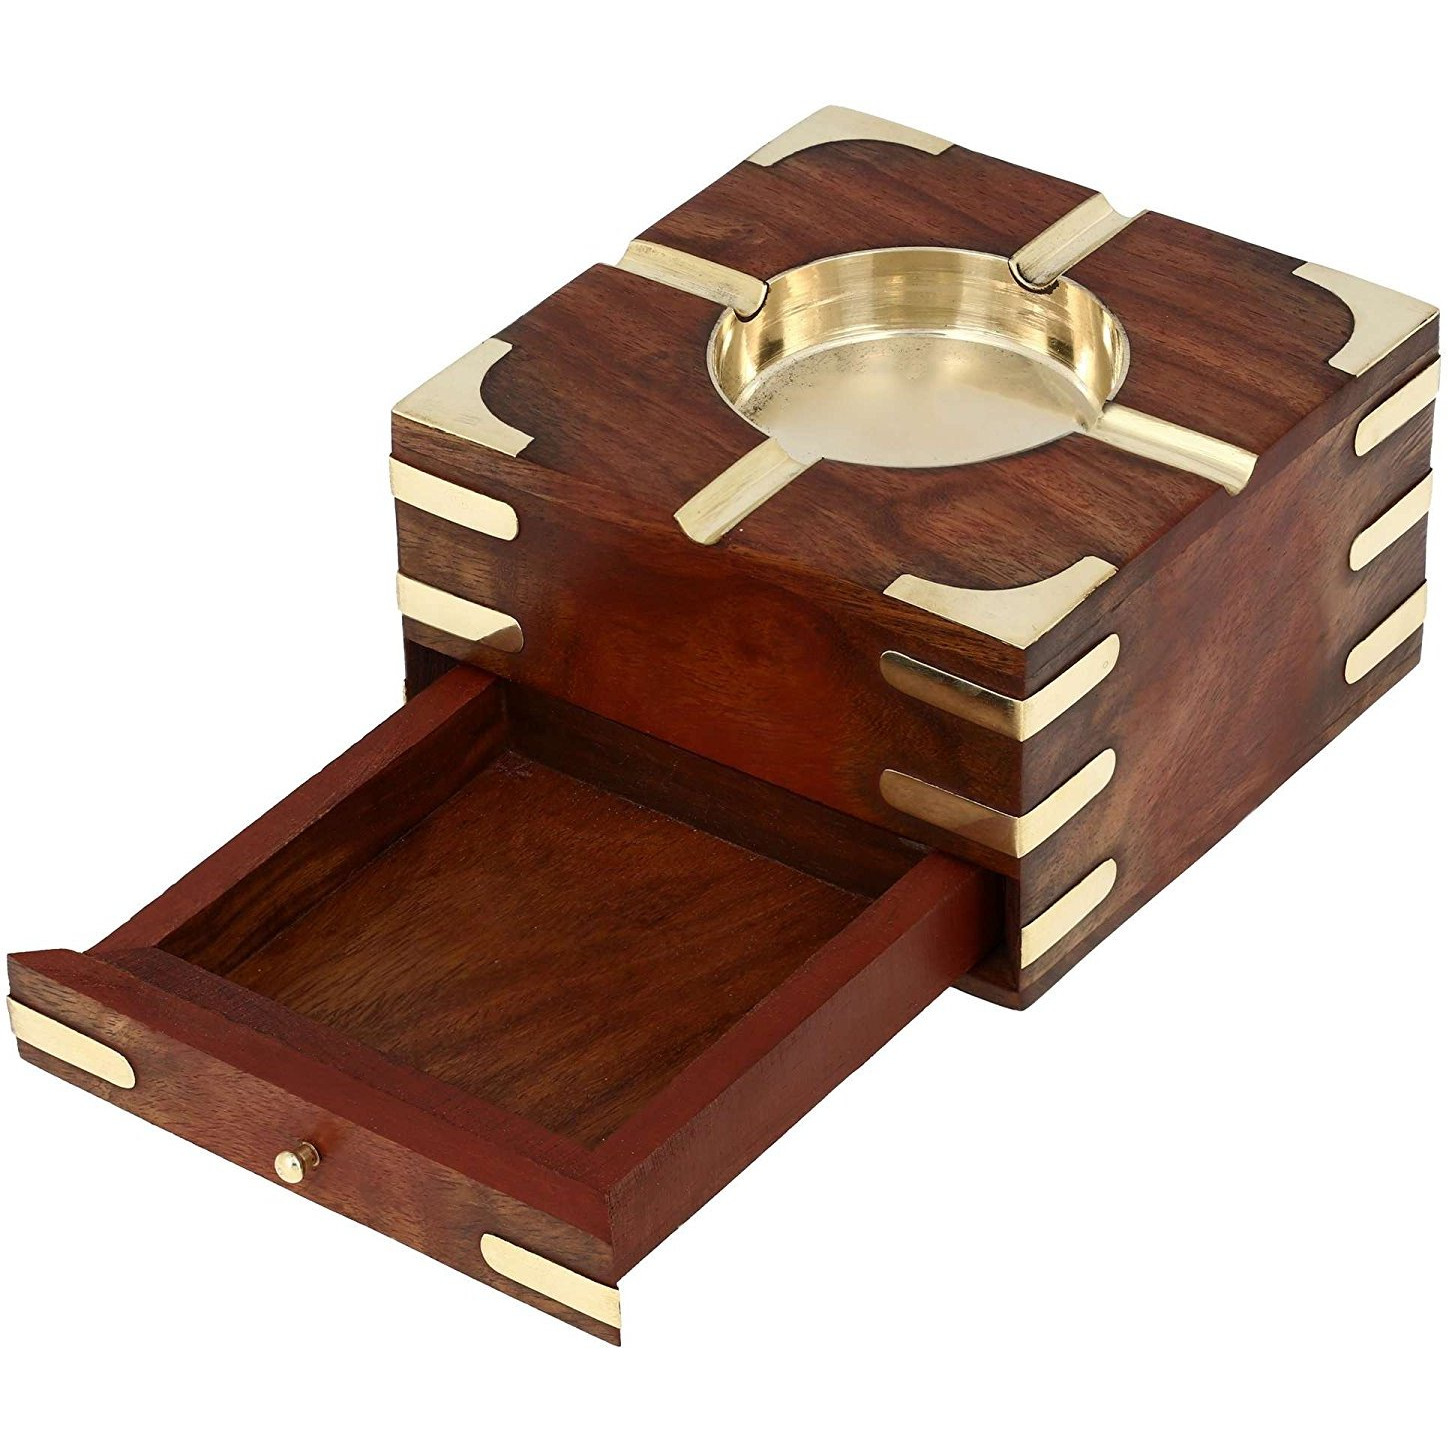 Winmaarc Large Decorative Wooden Ashtray with Cigarette Storage Case Box